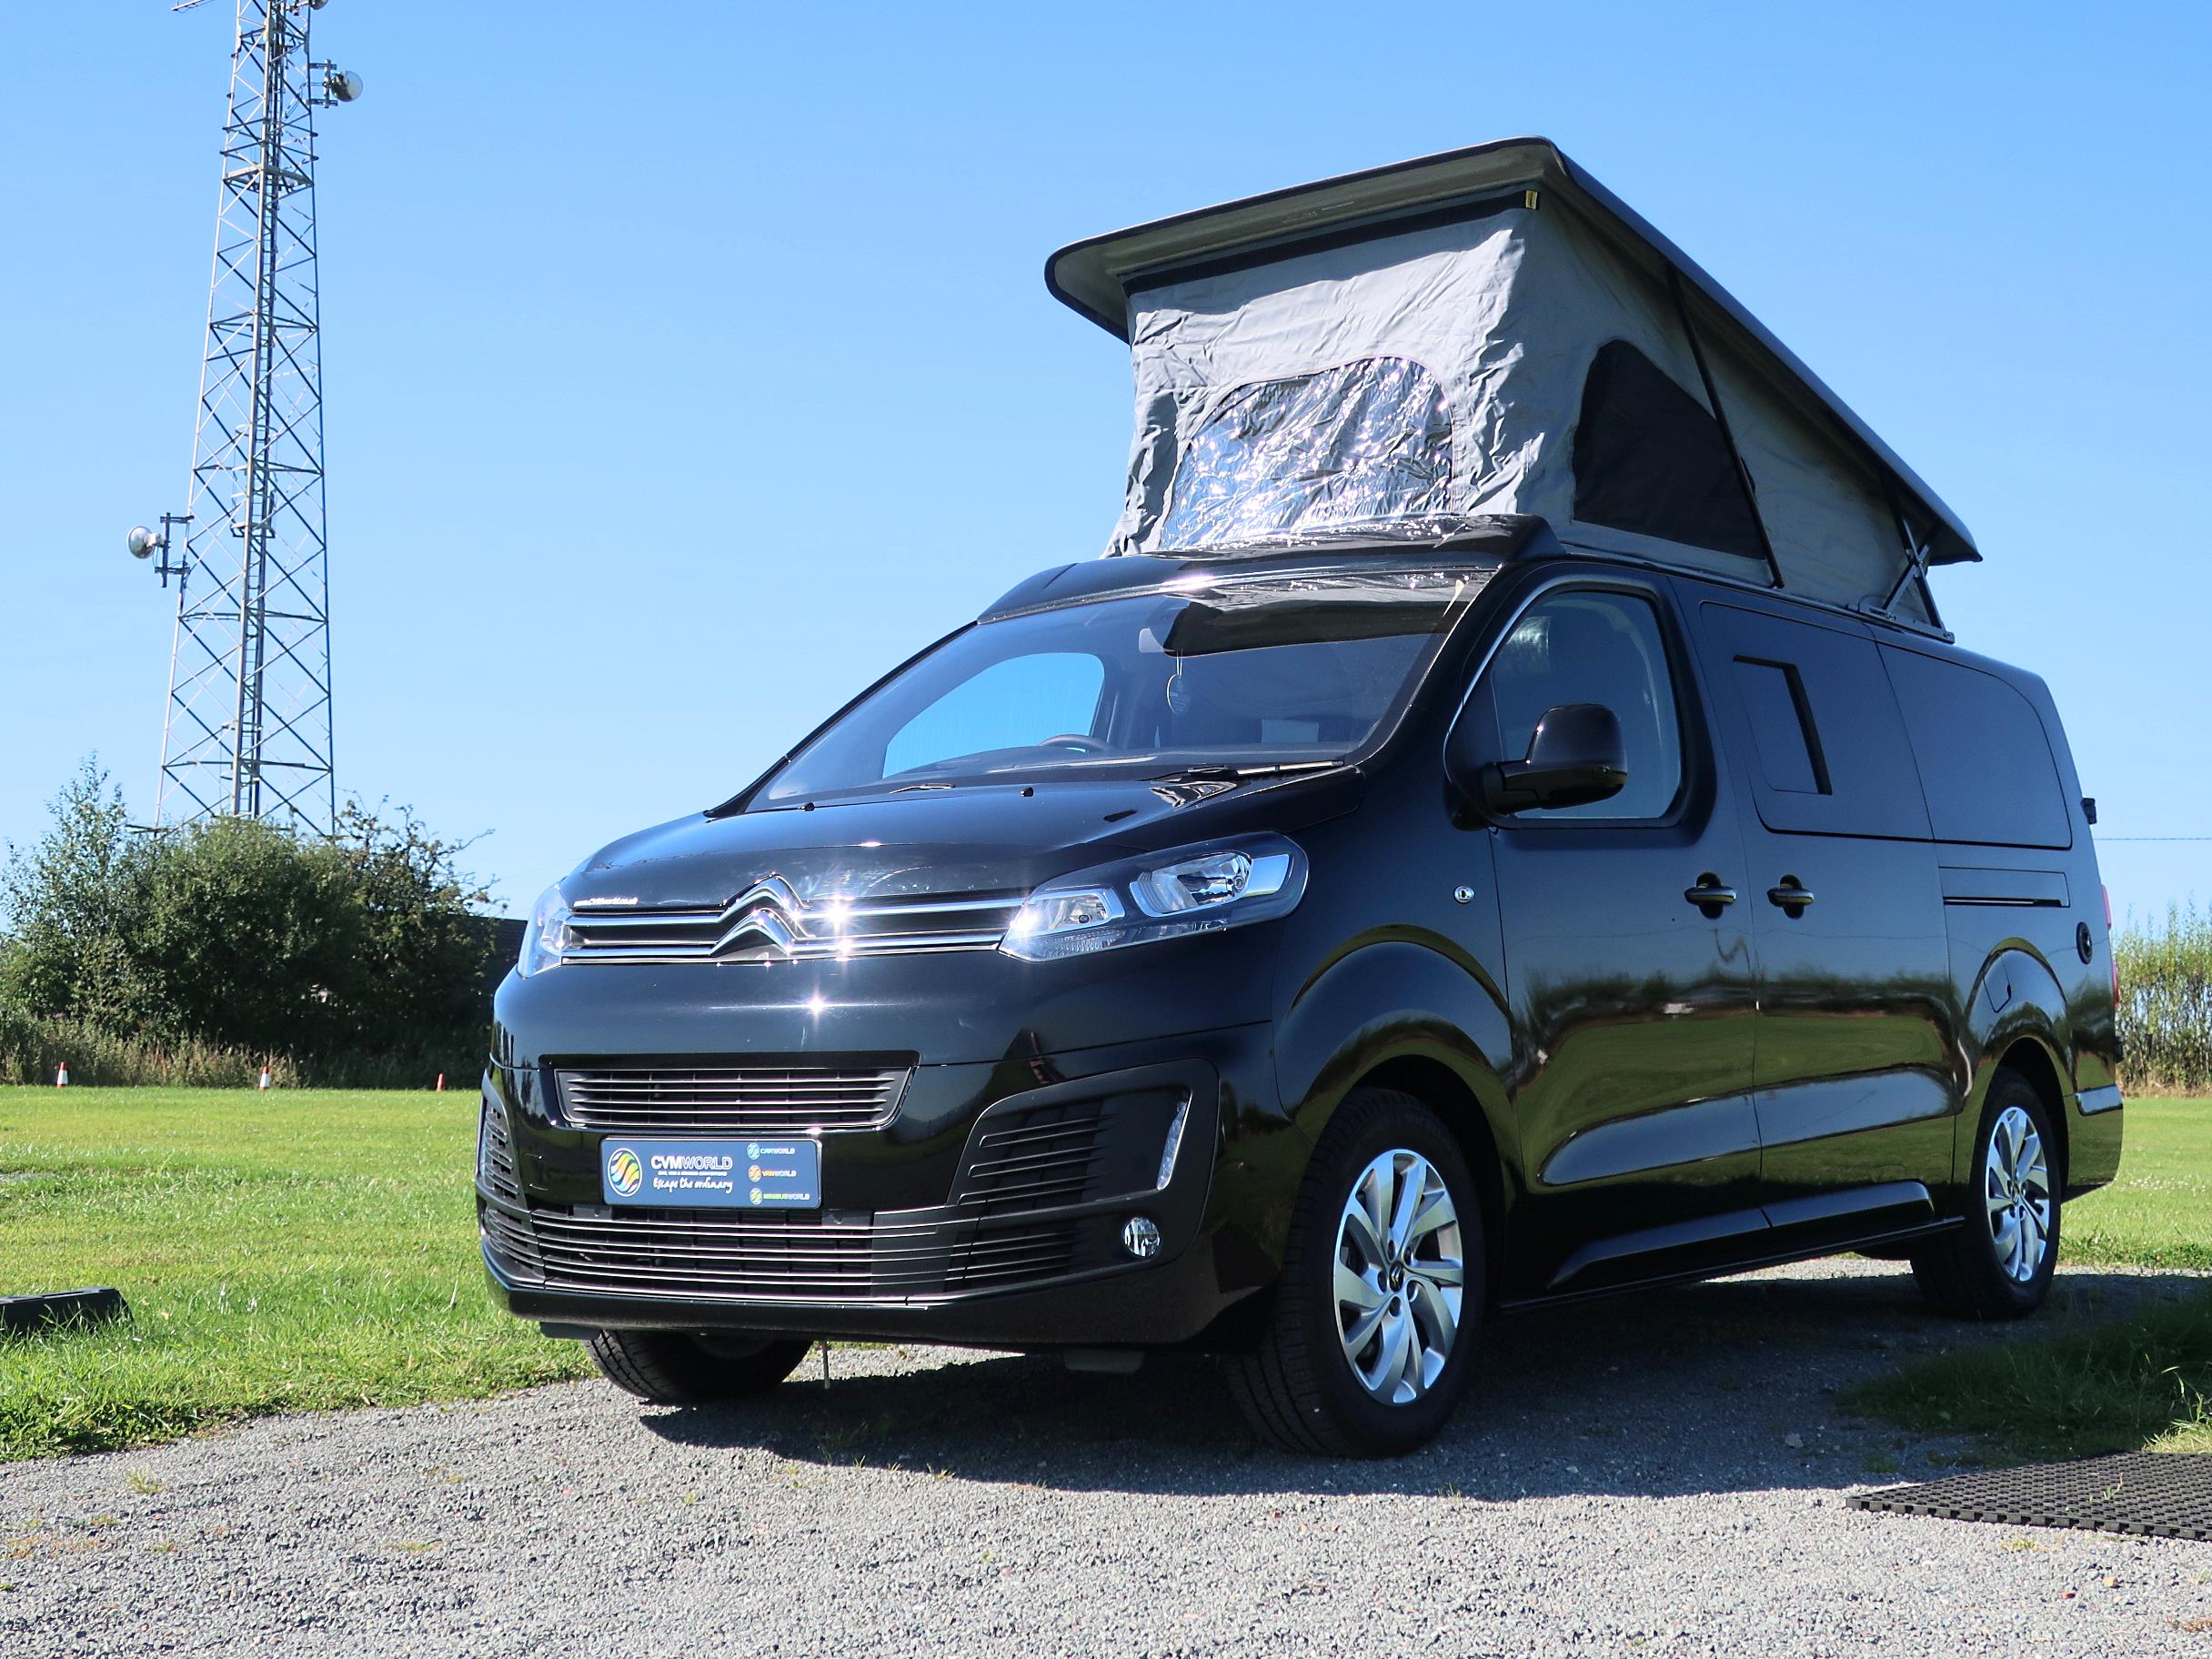 https://www.van-online.co.uk/wp-content/uploads/2023/03/Brand-New-Citroen-Dispatch-XL-4-Berth-4-Travelling-Campervan-in-Black-For-Sale-with-Black-Pop-Top-Roof-Rock-and-Roll-Bed-and-Solar-Panel-Pop-Top-Roof-1.jpg